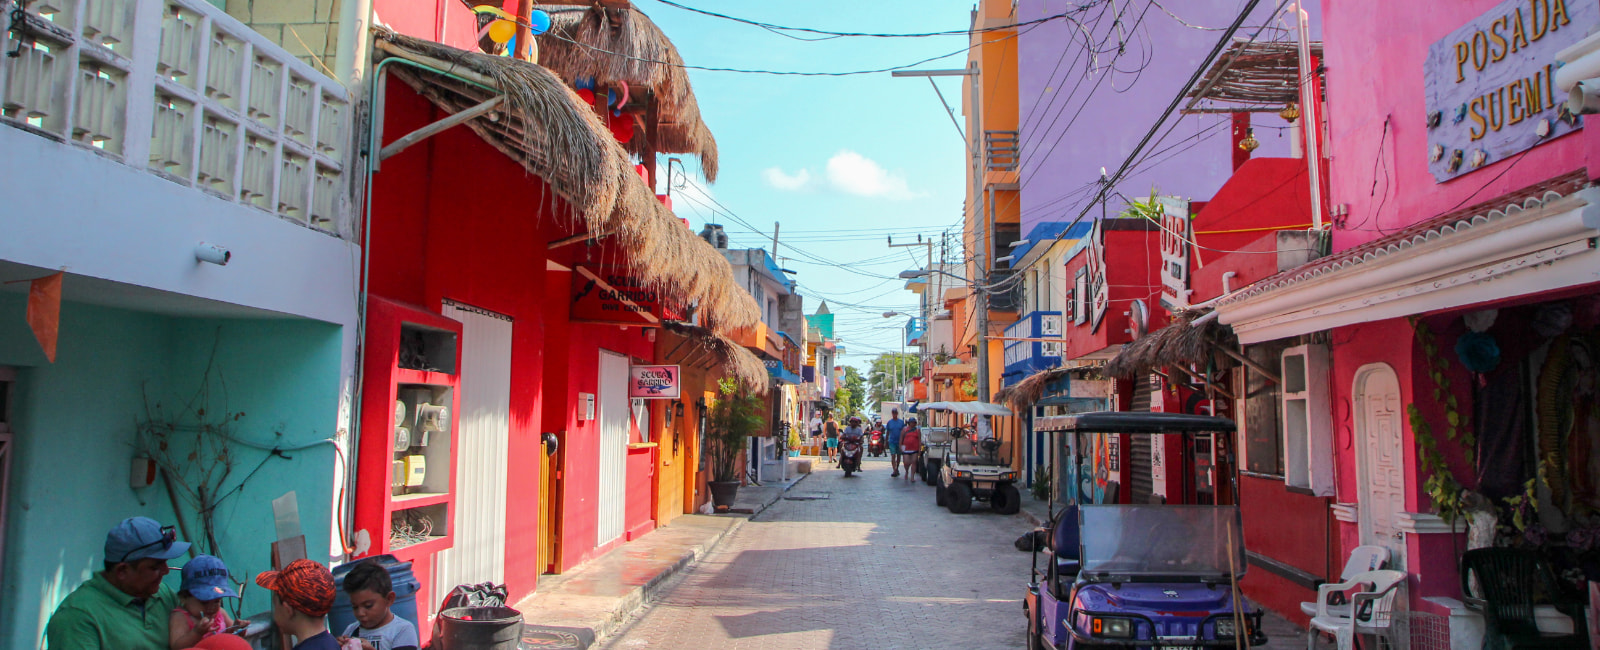 View of a street with colorful shops and houses in Isla Mujeres.